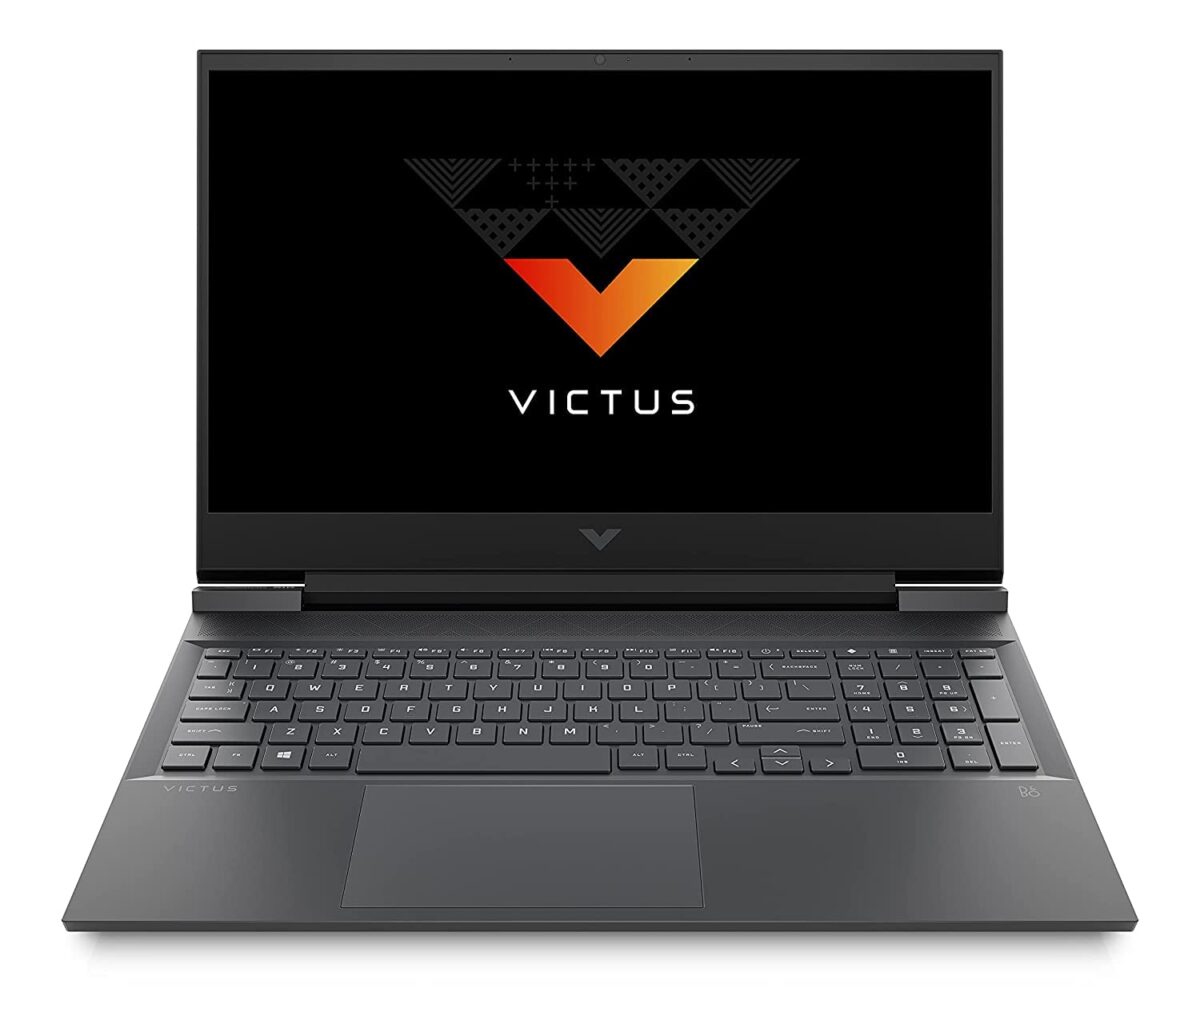 HP 16-e0333TX Victus Gaming Laptop Launched in India ( AMD Ryzen 5 5600H / Nvidia RTX 3060 / 16GB ram / 512GB SSD )